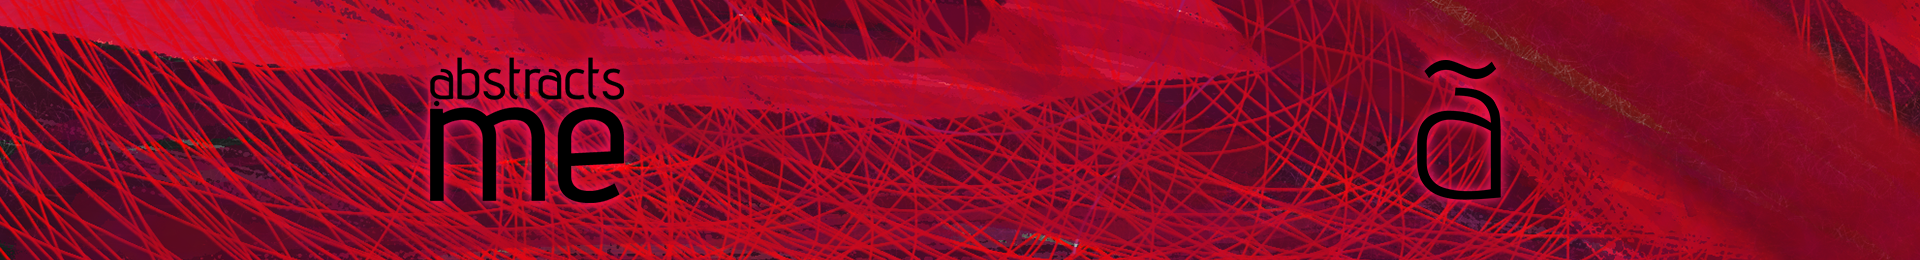 abstracts.me banner